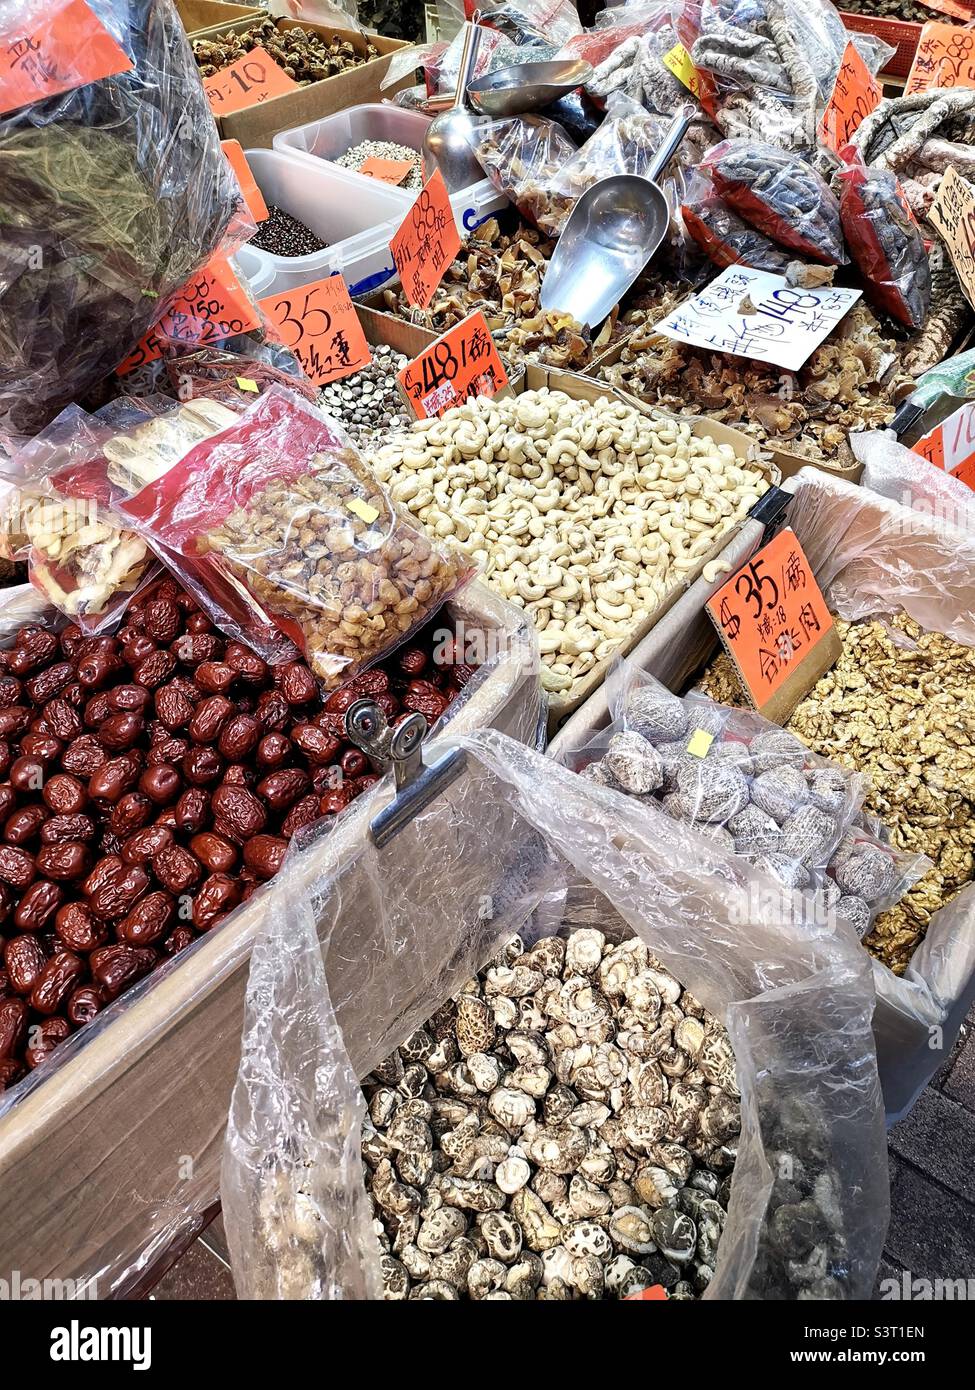 Dried seafood and nuts at a market in Hong Kong. Stock Photo